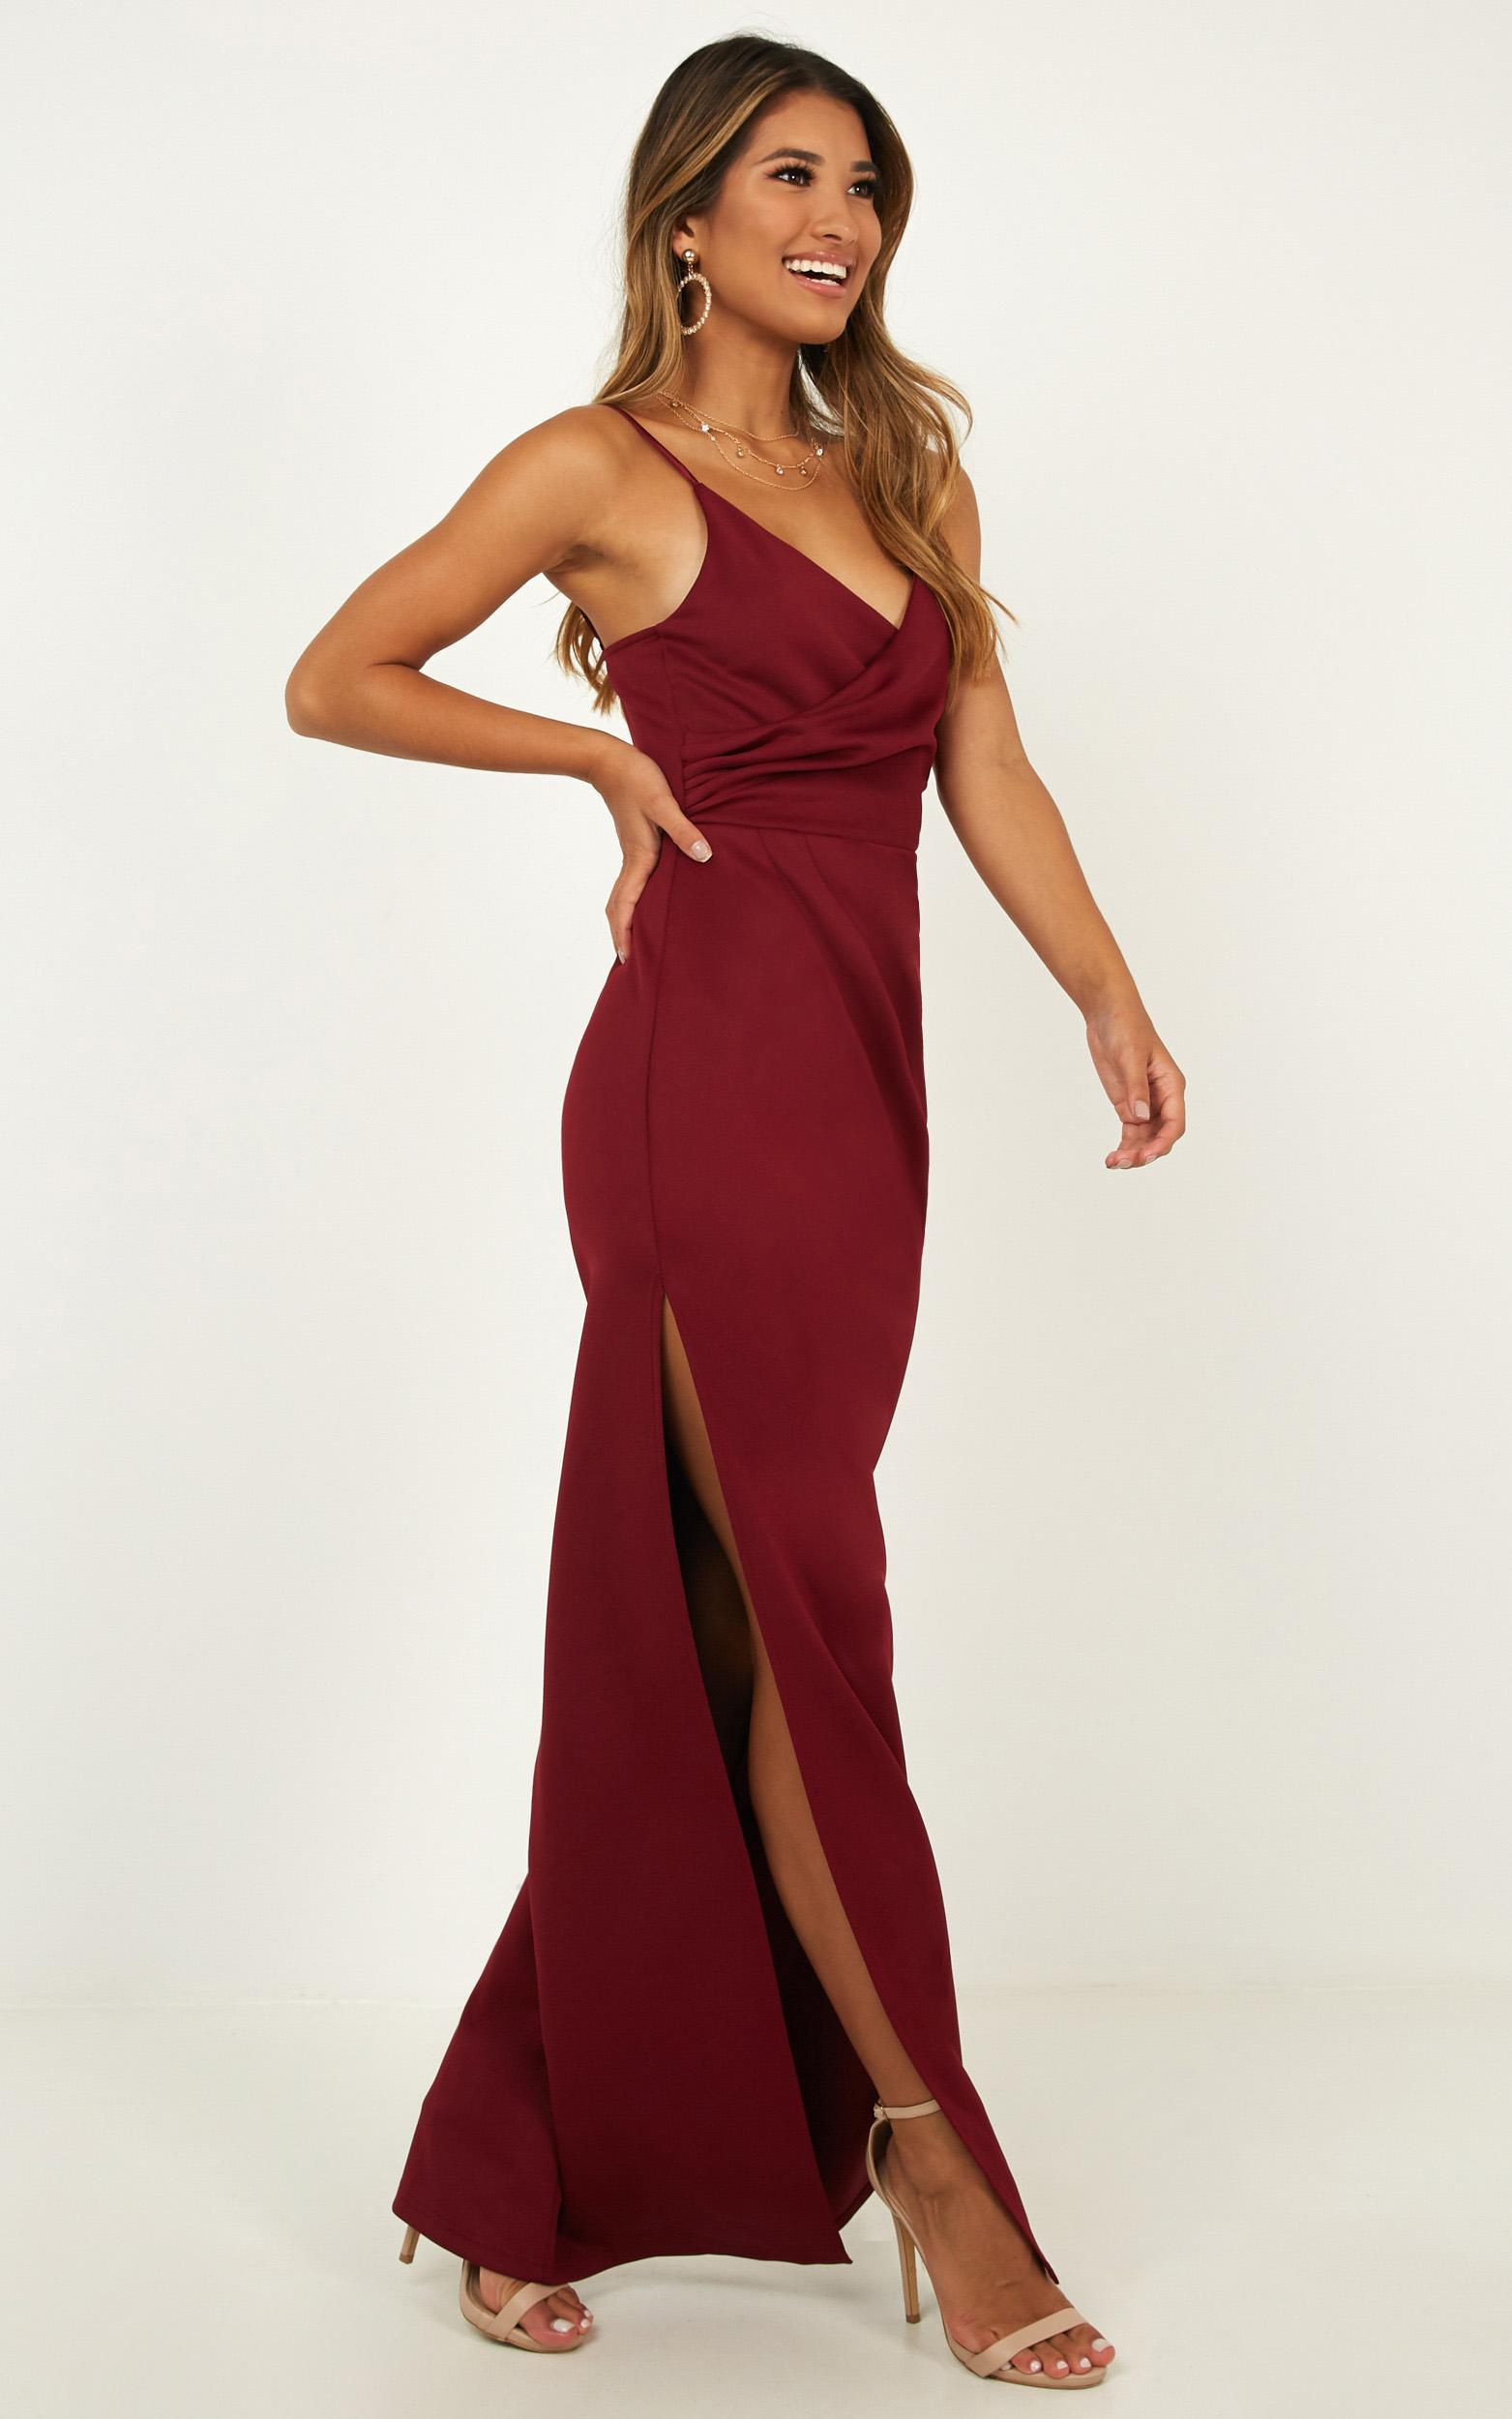 Linking Love Slip Maxi Dress in Wine - 06, WNE5, hi-res image number null